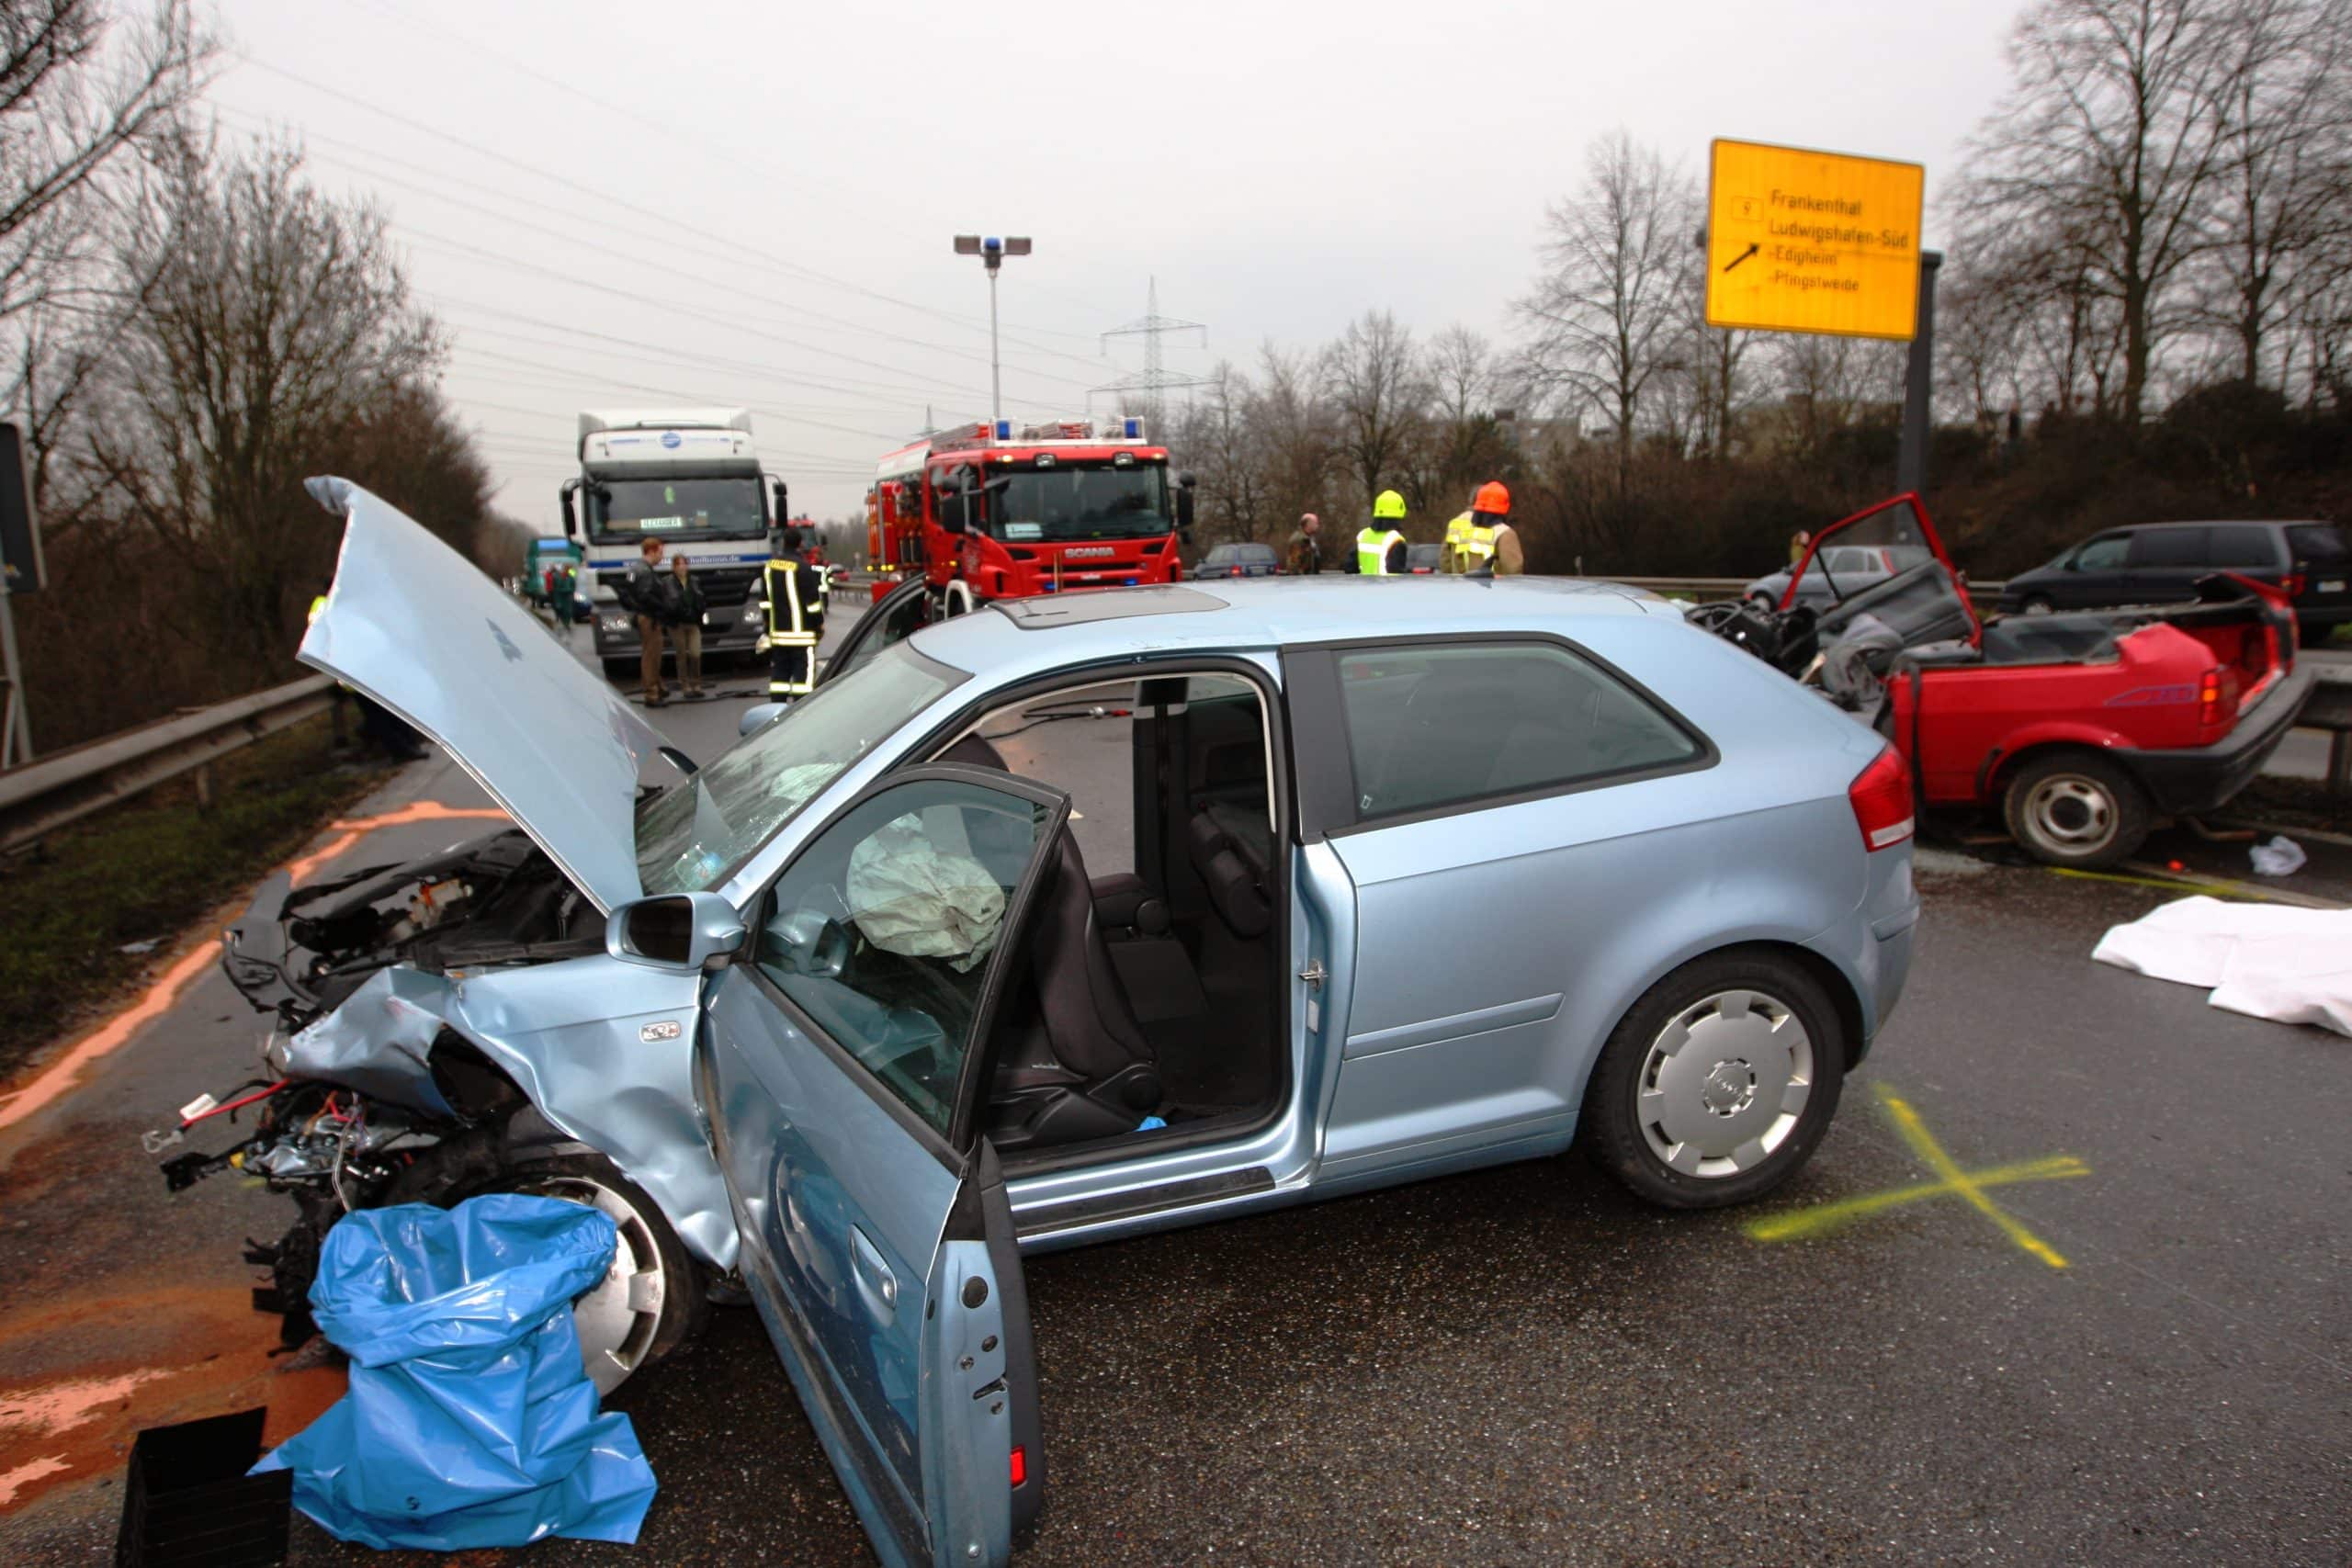 Multi-Vehicle Collisions: Who is At Fault?